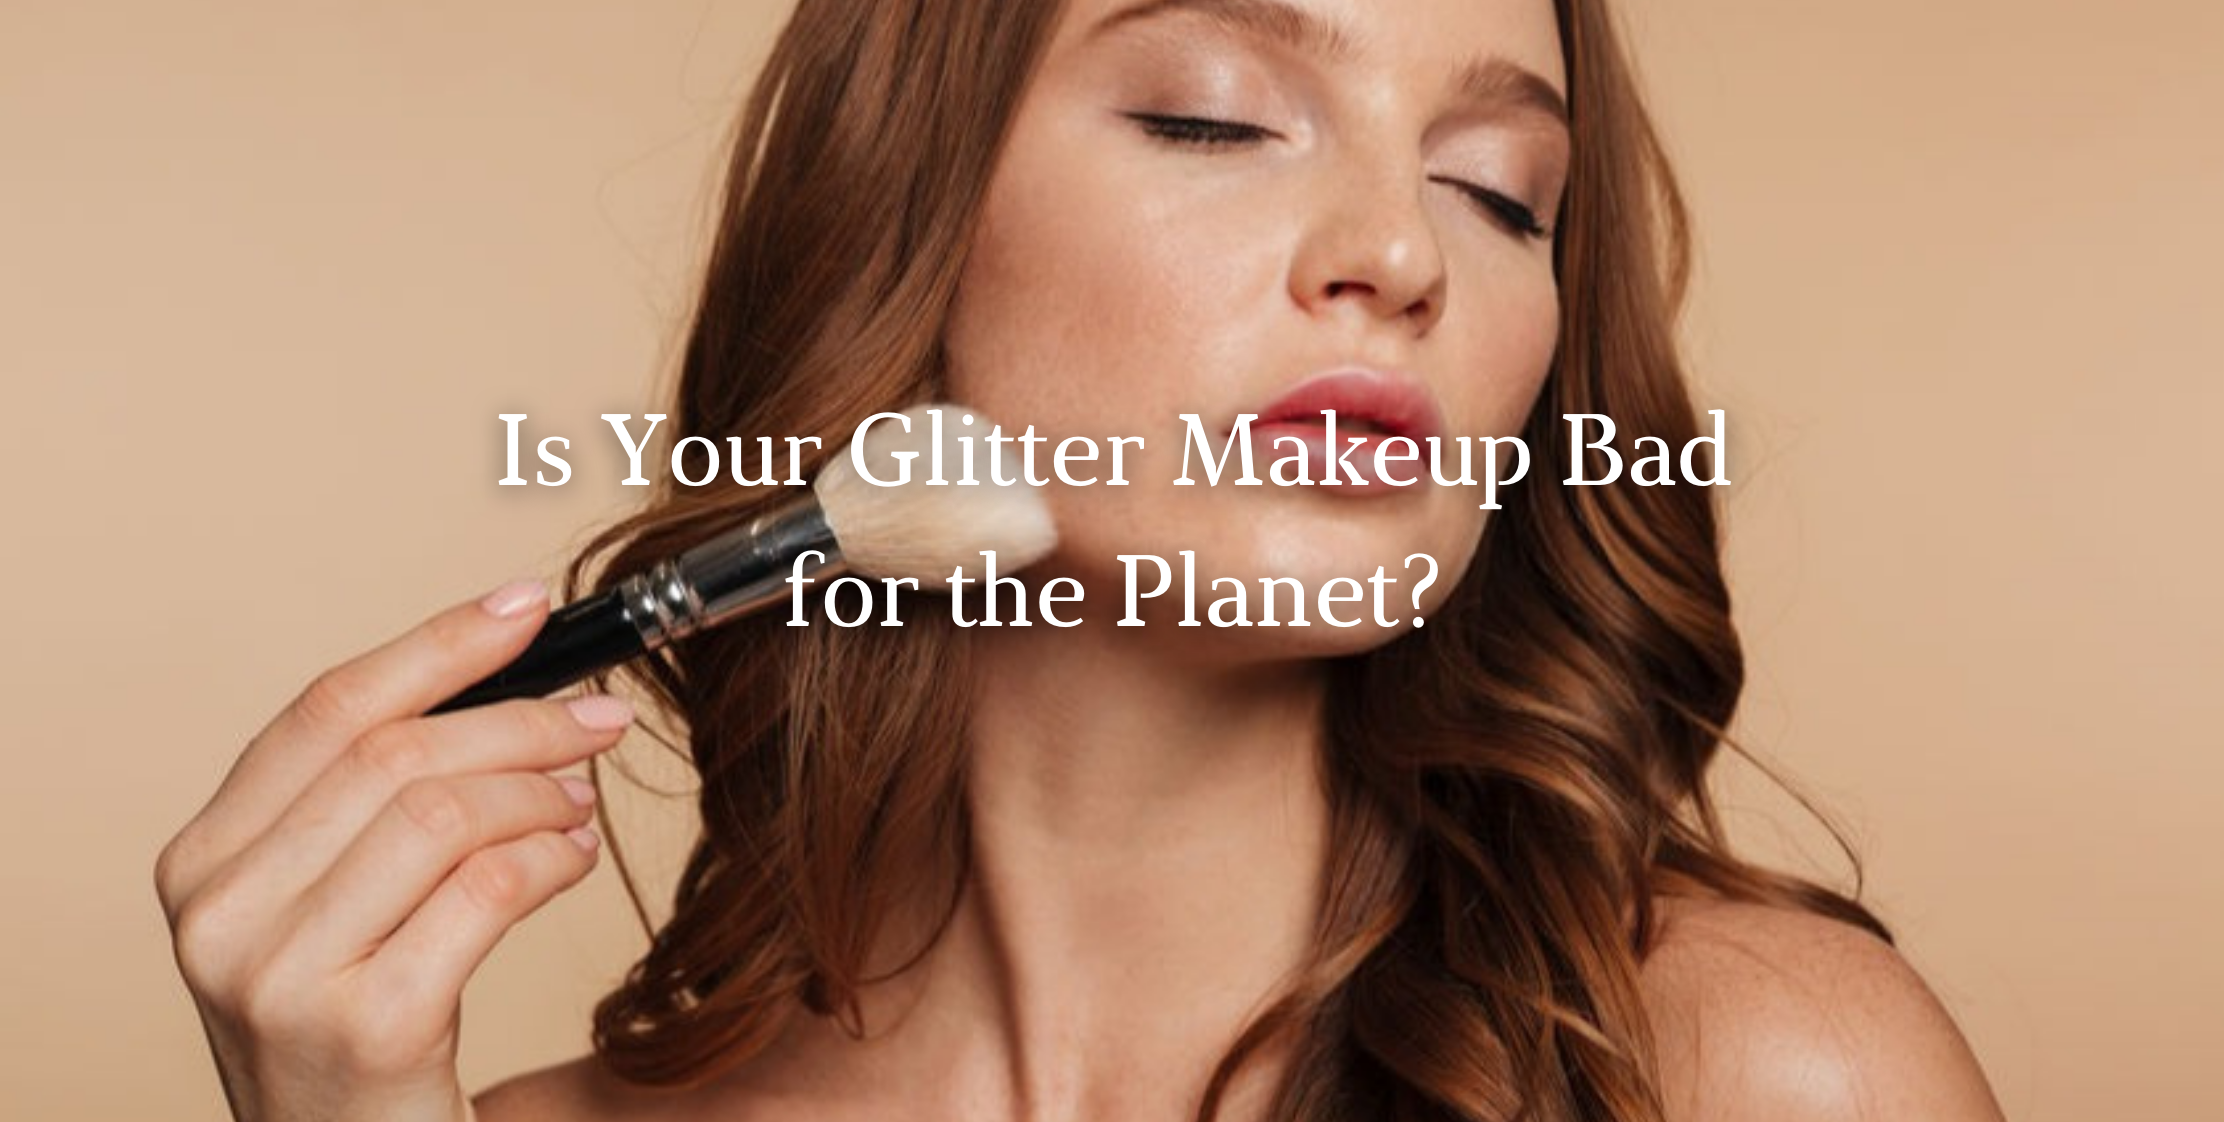 Is Your Glitter Makeup Bad for the Planet? image